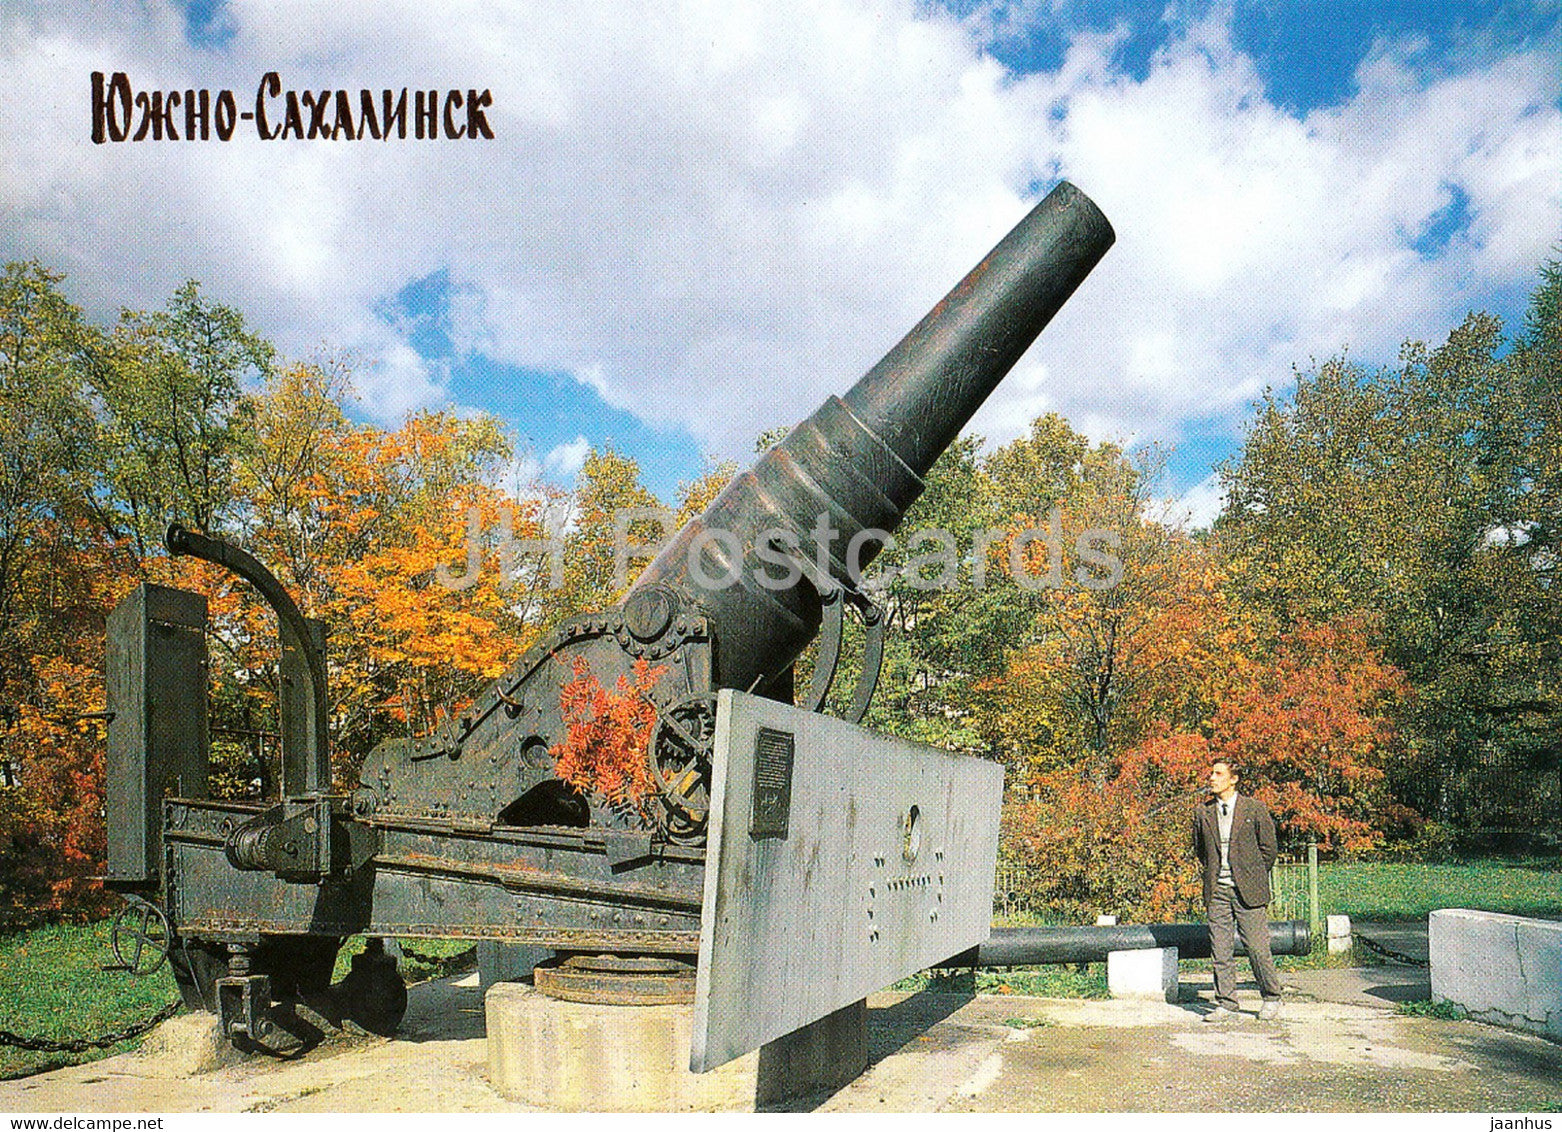 Yuzhno-Sakhalinsk - A Russian 11 inch cannon on territory of the Museum of Local Lore - 1990 - Russia USSR - unused - JH Postcards